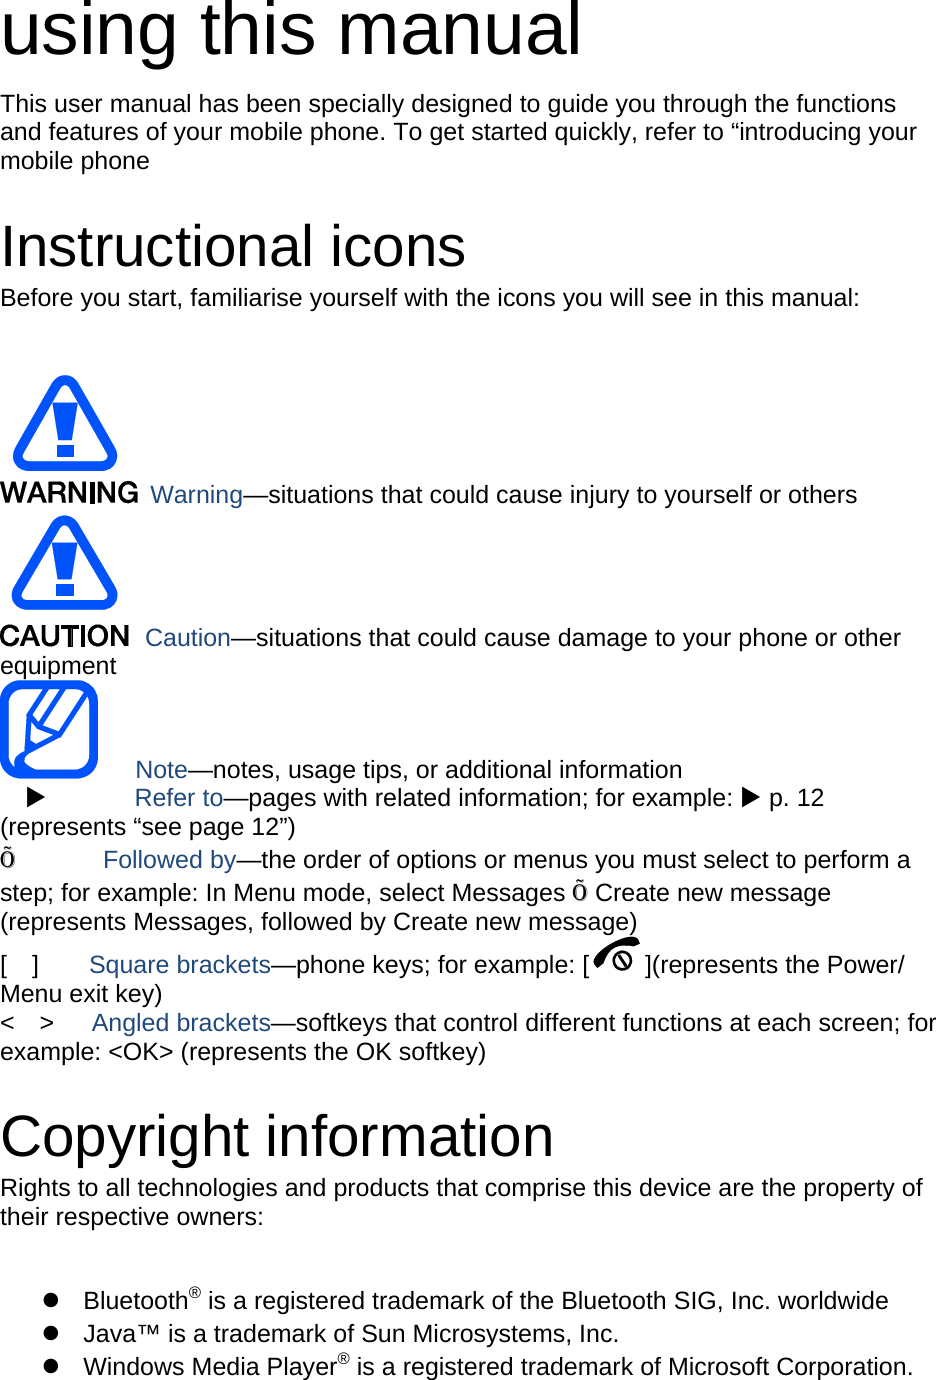   using this manual This user manual has been specially designed to guide you through the functions and features of your mobile phone. To get started quickly, refer to “introducing your mobile phone  Instructional icons Before you start, familiarise yourself with the icons you will see in this manual:     Warning—situations that could cause injury to yourself or others  Caution—situations that could cause damage to your phone or other equipment    Note—notes, usage tips, or additional information          Refer to—pages with related information; for example:  p. 12 (represents “see page 12”) Õ       Followed by—the order of options or menus you must select to perform a step; for example: In Menu mode, select Messages Õ Create new message (represents Messages, followed by Create new message) [  ]    Square brackets—phone keys; for example: [ ](represents the Power/ Menu exit key) &lt;  &gt;   Angled brackets—softkeys that control different functions at each screen; for example: &lt;OK&gt; (represents the OK softkey)  Copyright information Rights to all technologies and products that comprise this device are the property of their respective owners:   Bluetooth® is a registered trademark of the Bluetooth SIG, Inc. worldwide   Java™ is a trademark of Sun Microsystems, Inc.  Windows Media Player® is a registered trademark of Microsoft Corporation. 